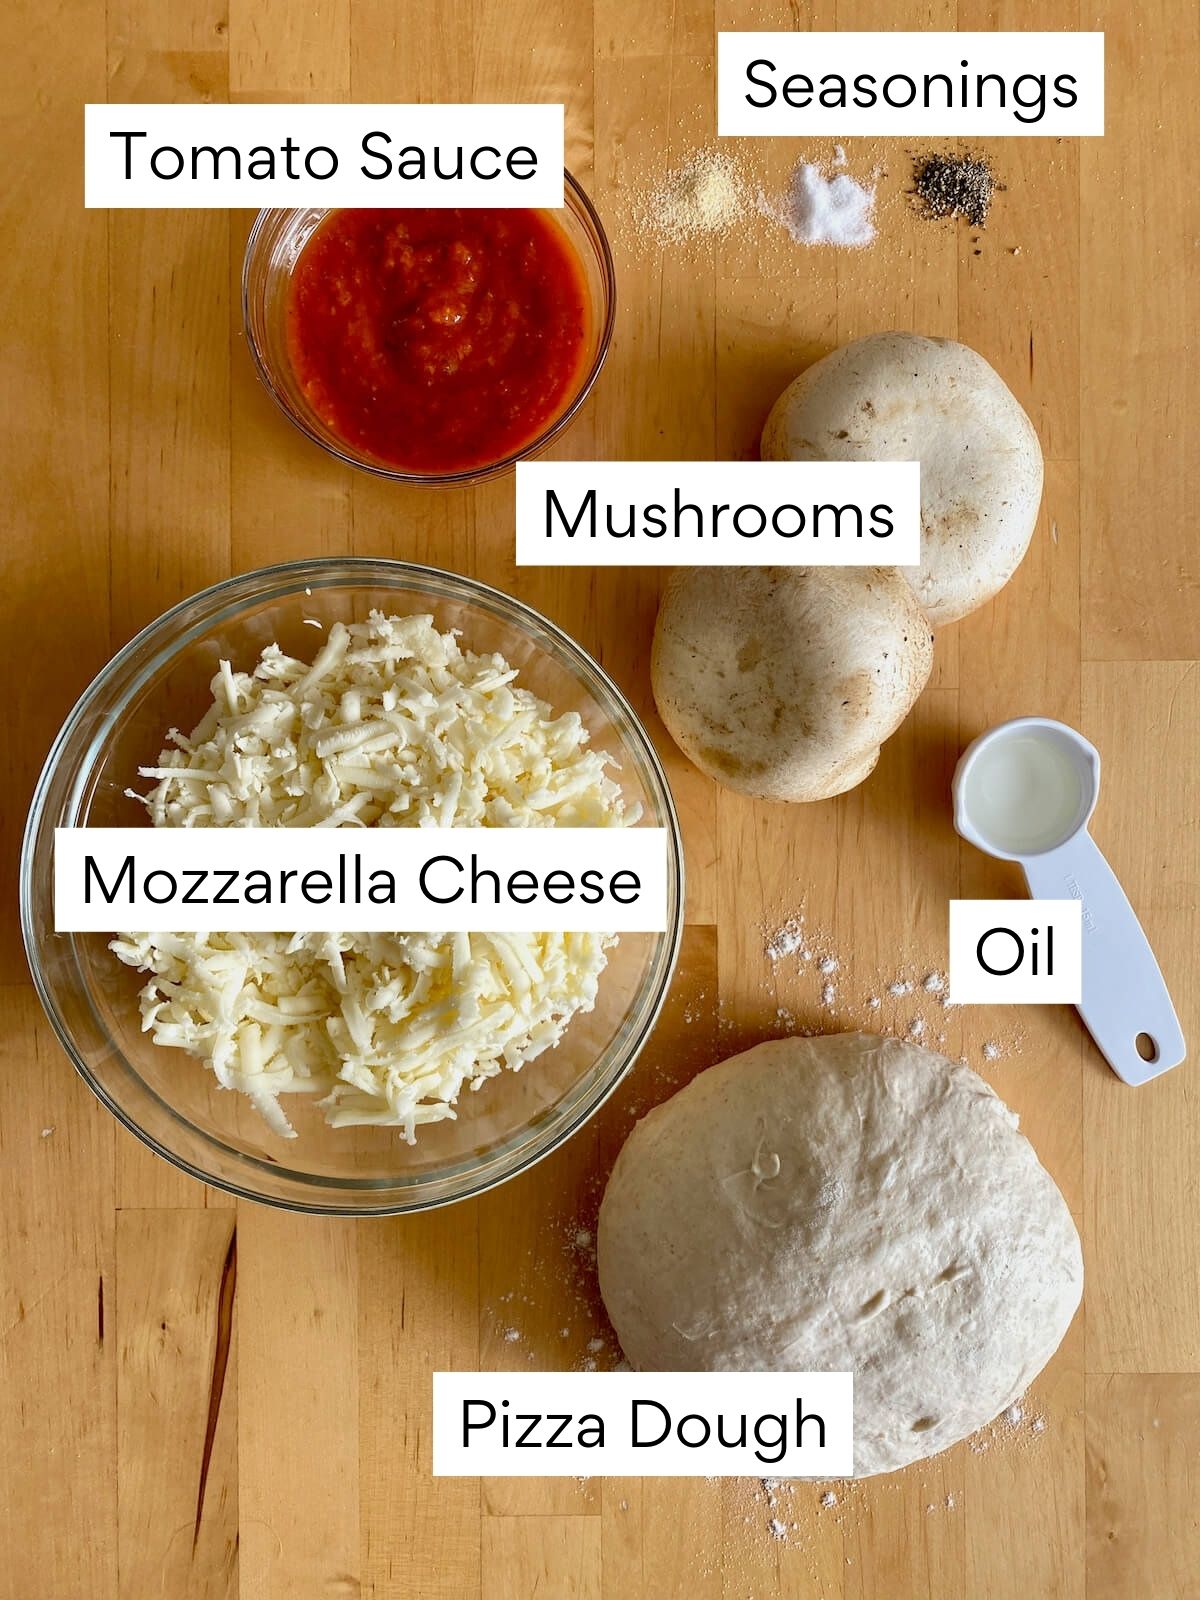 The ingredients to make mushroom pizza on a butcher block countertop. Each ingredient is labeled with text. They include tomato sauce, seasonings, mushrooms, mozzarella cheese, oil, and pizza dough.